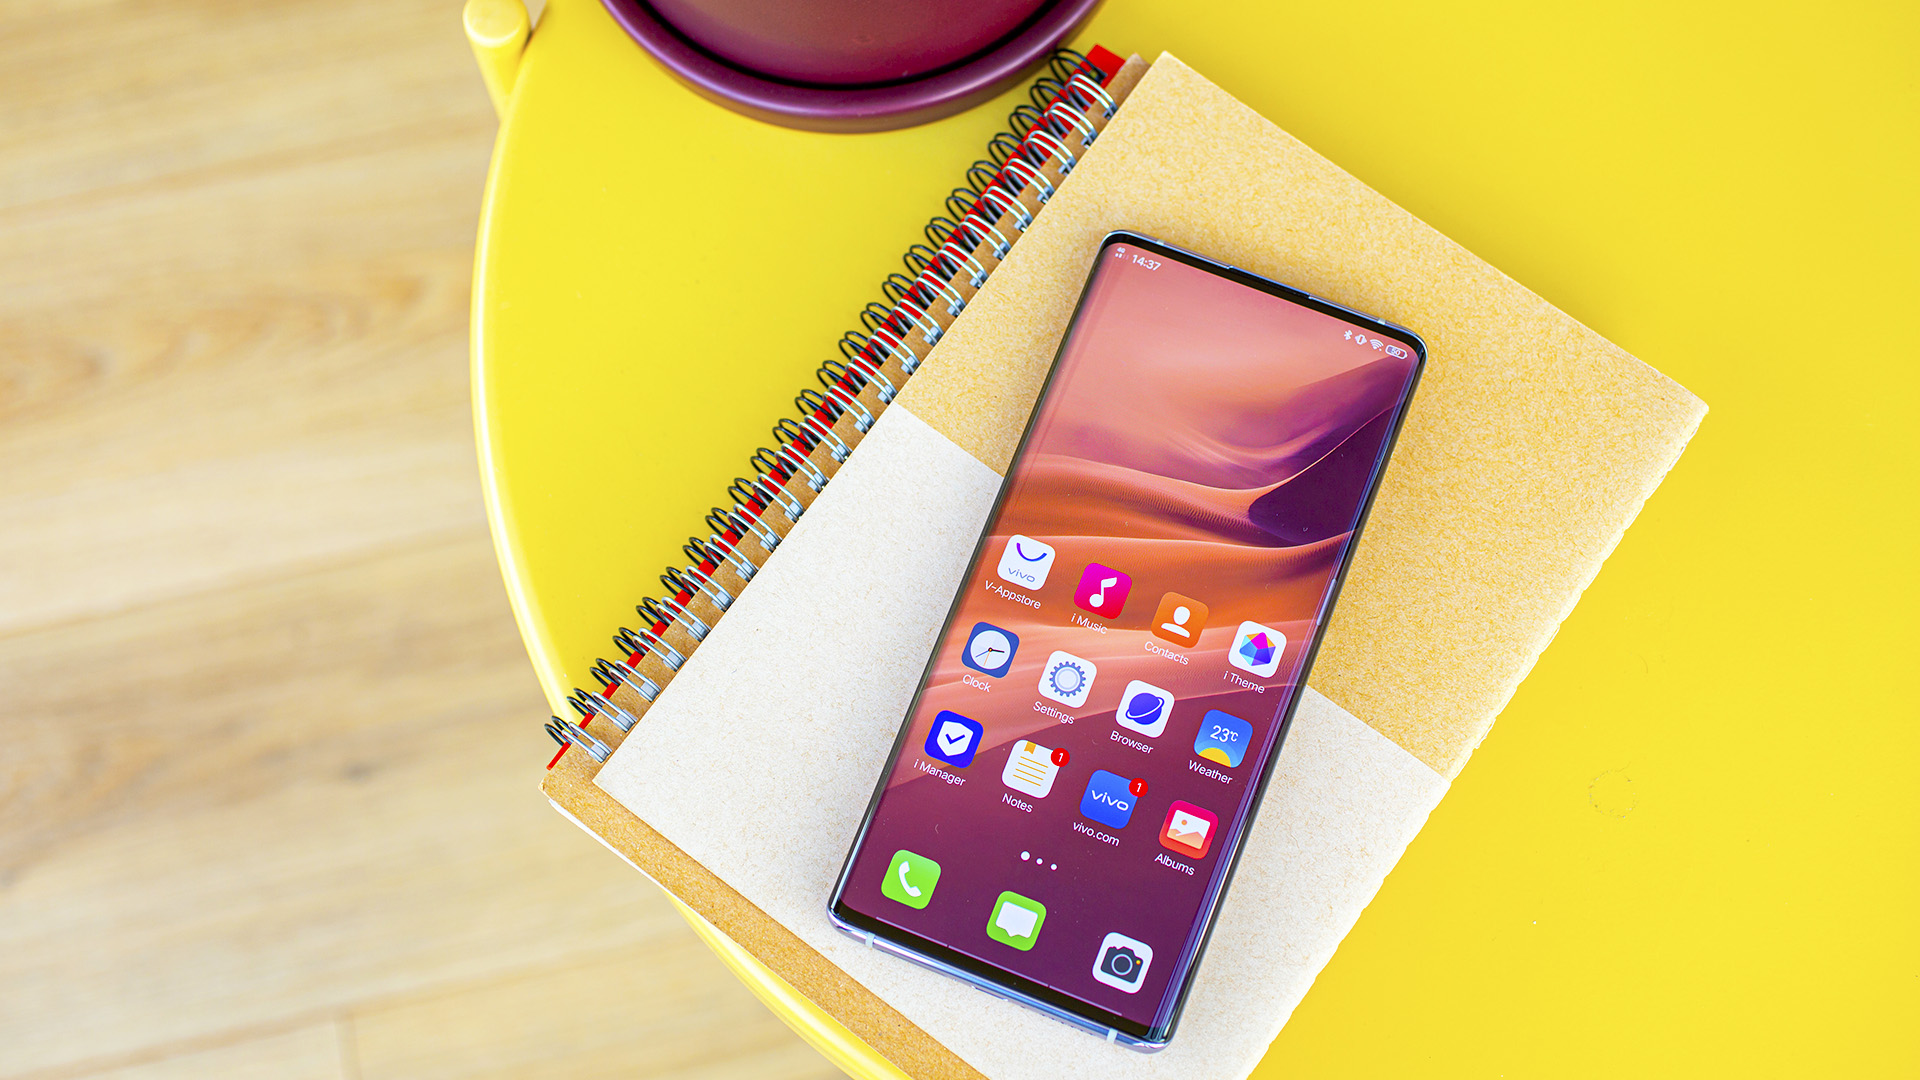 Vivo will launch a new phone at MWC on 23rd February 2020